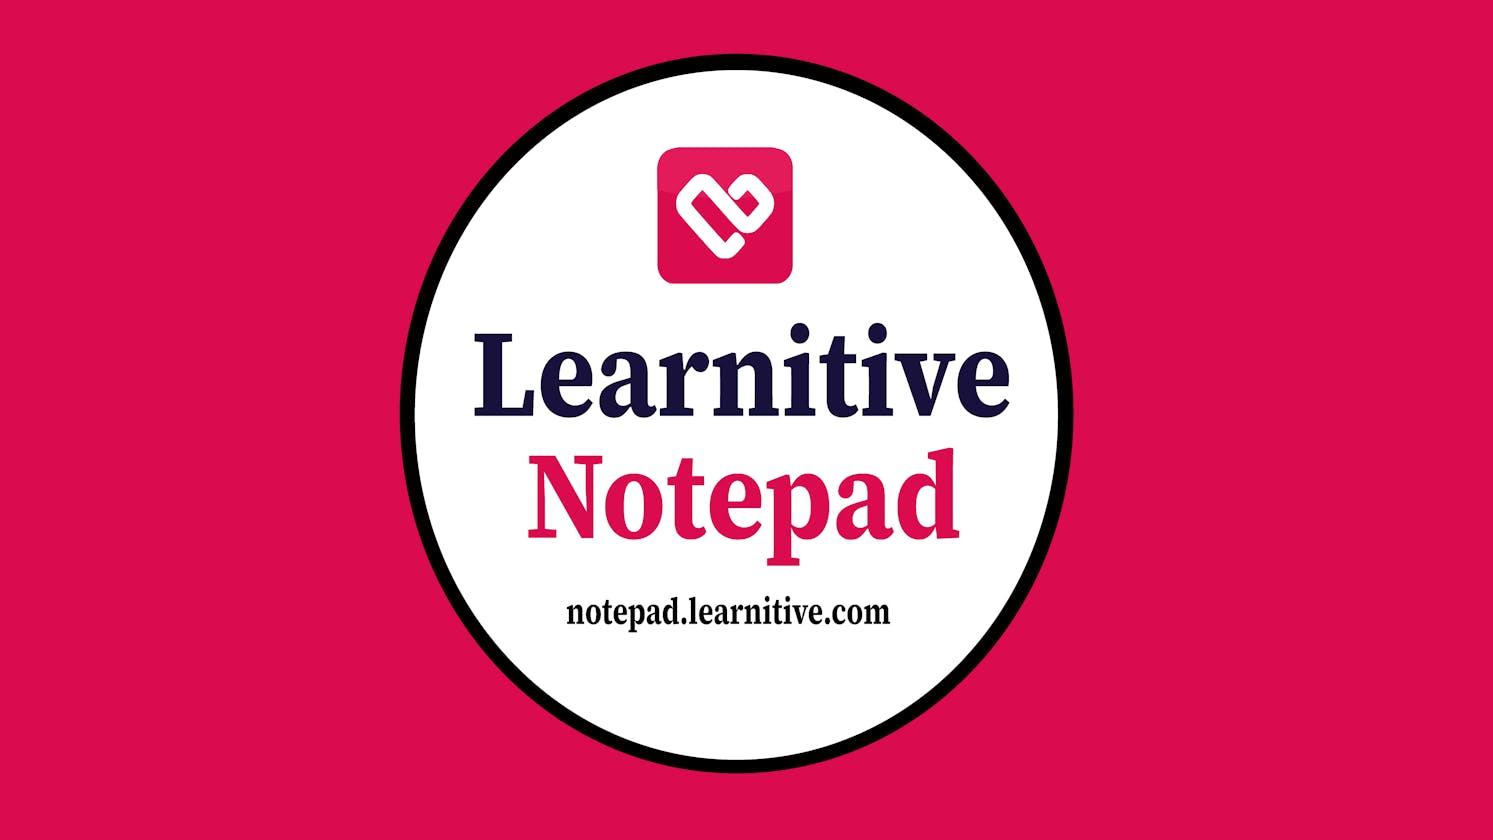 Learnitive Notepad